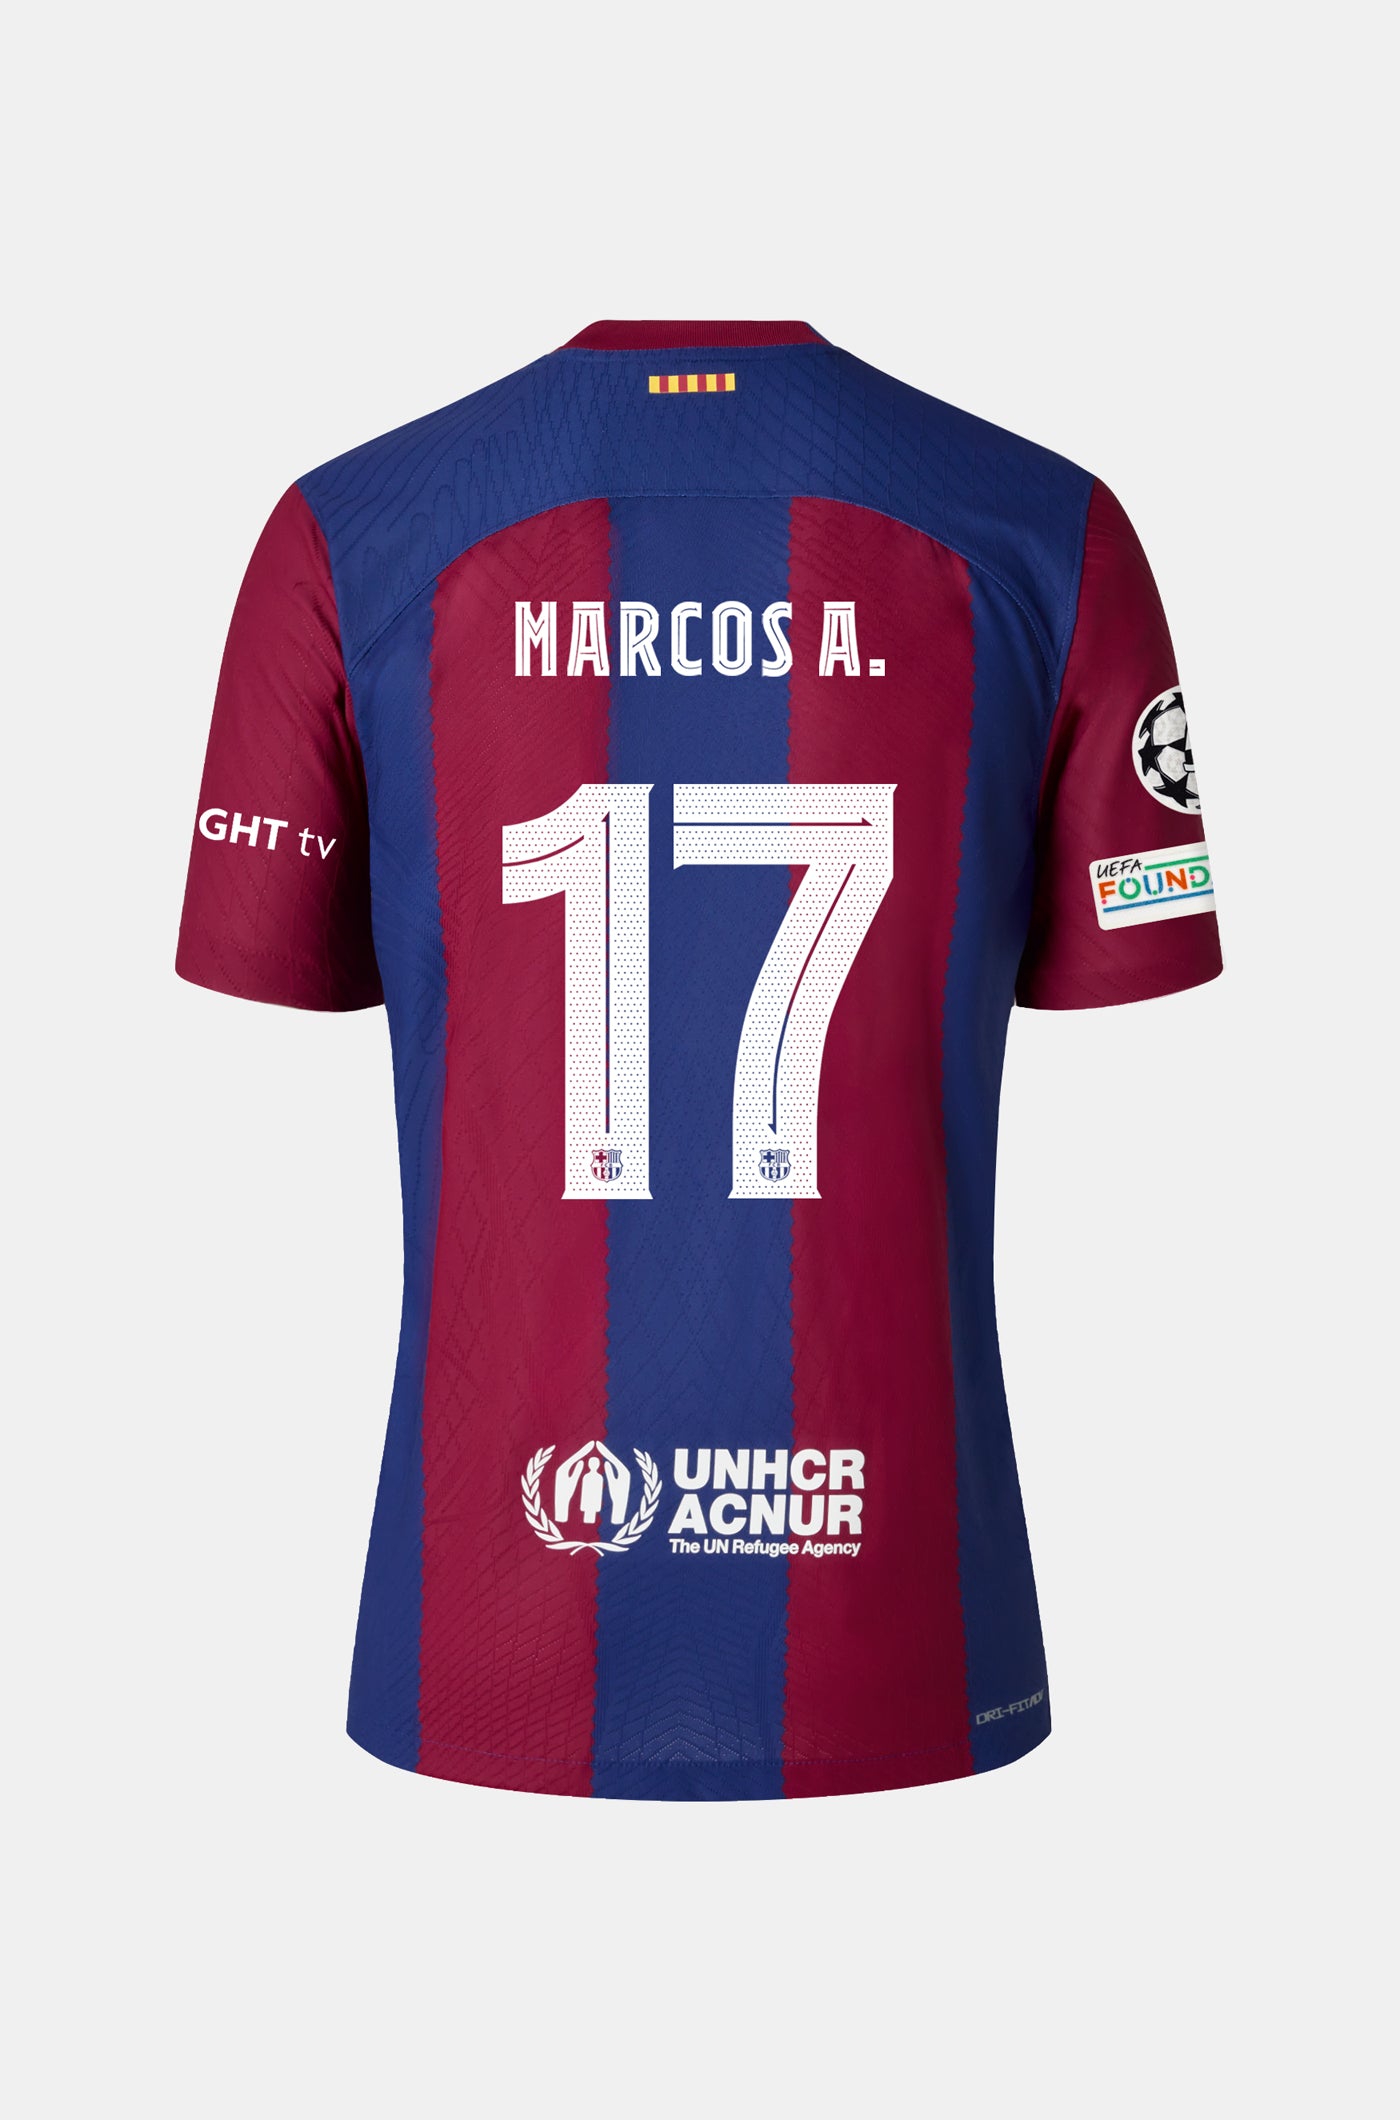 UCL FC Barcelona Home Shirt 23/24 Player's Edition - Women - MARCOS A.